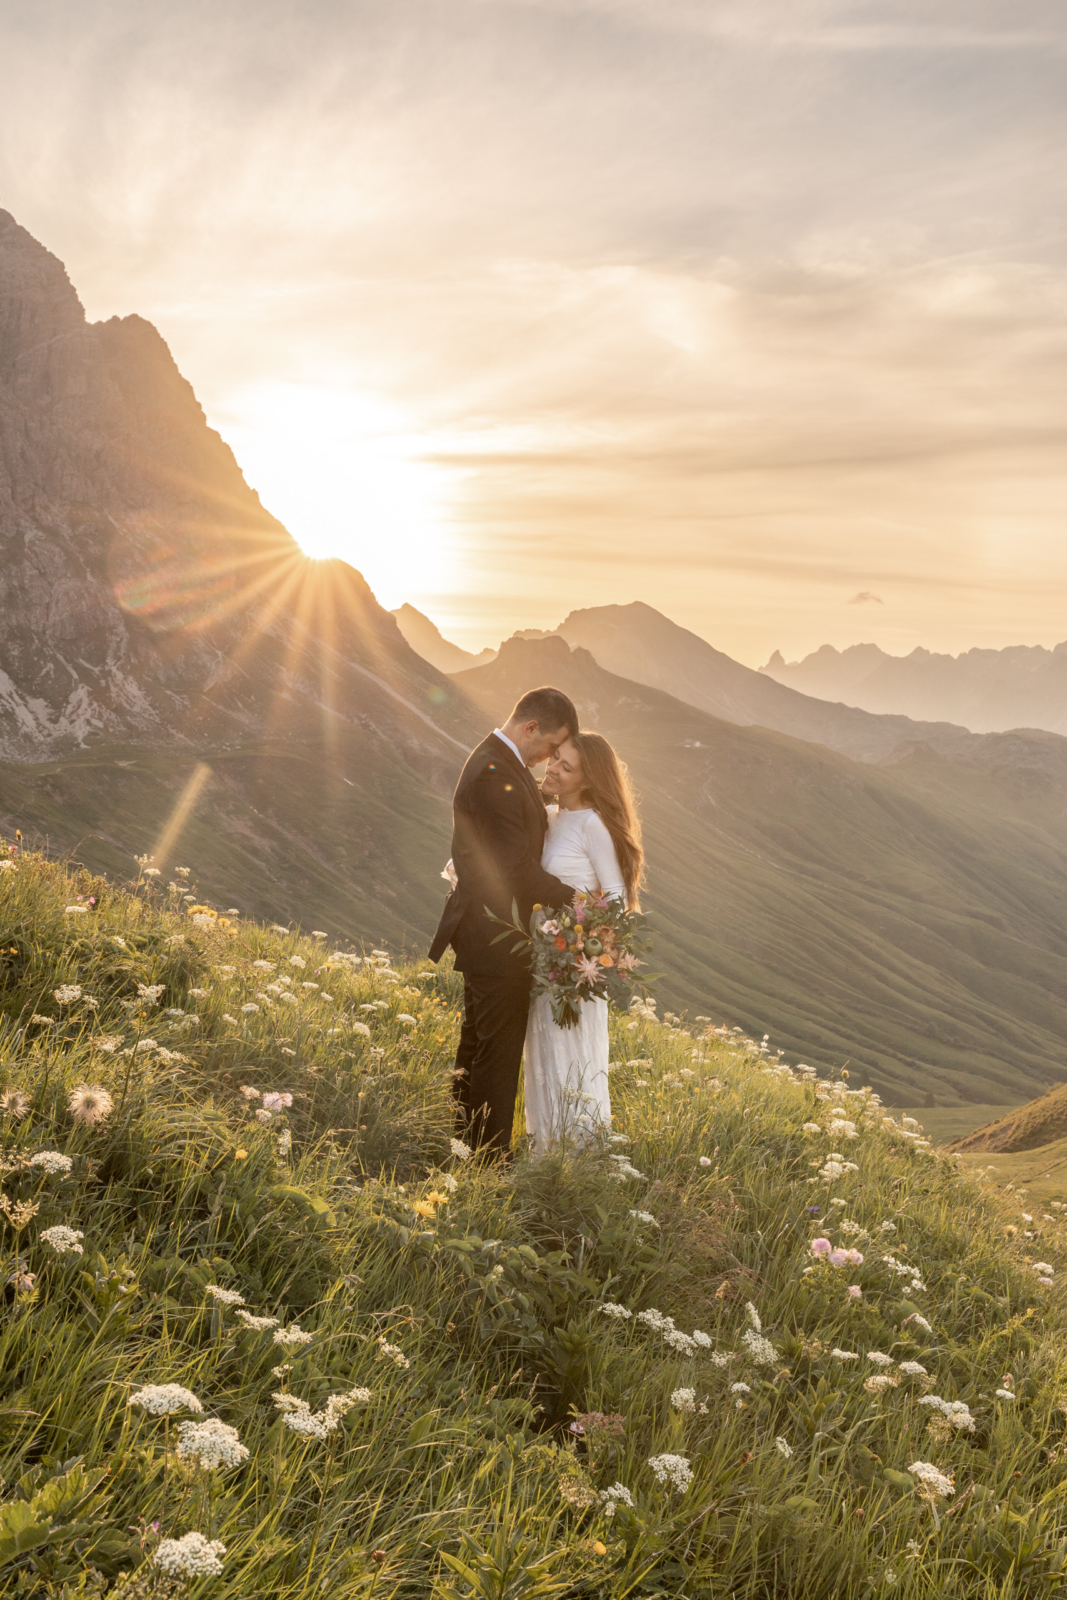 Romantic Sunrise Wedding Amidst the Blooming Wildflowers in the Alps